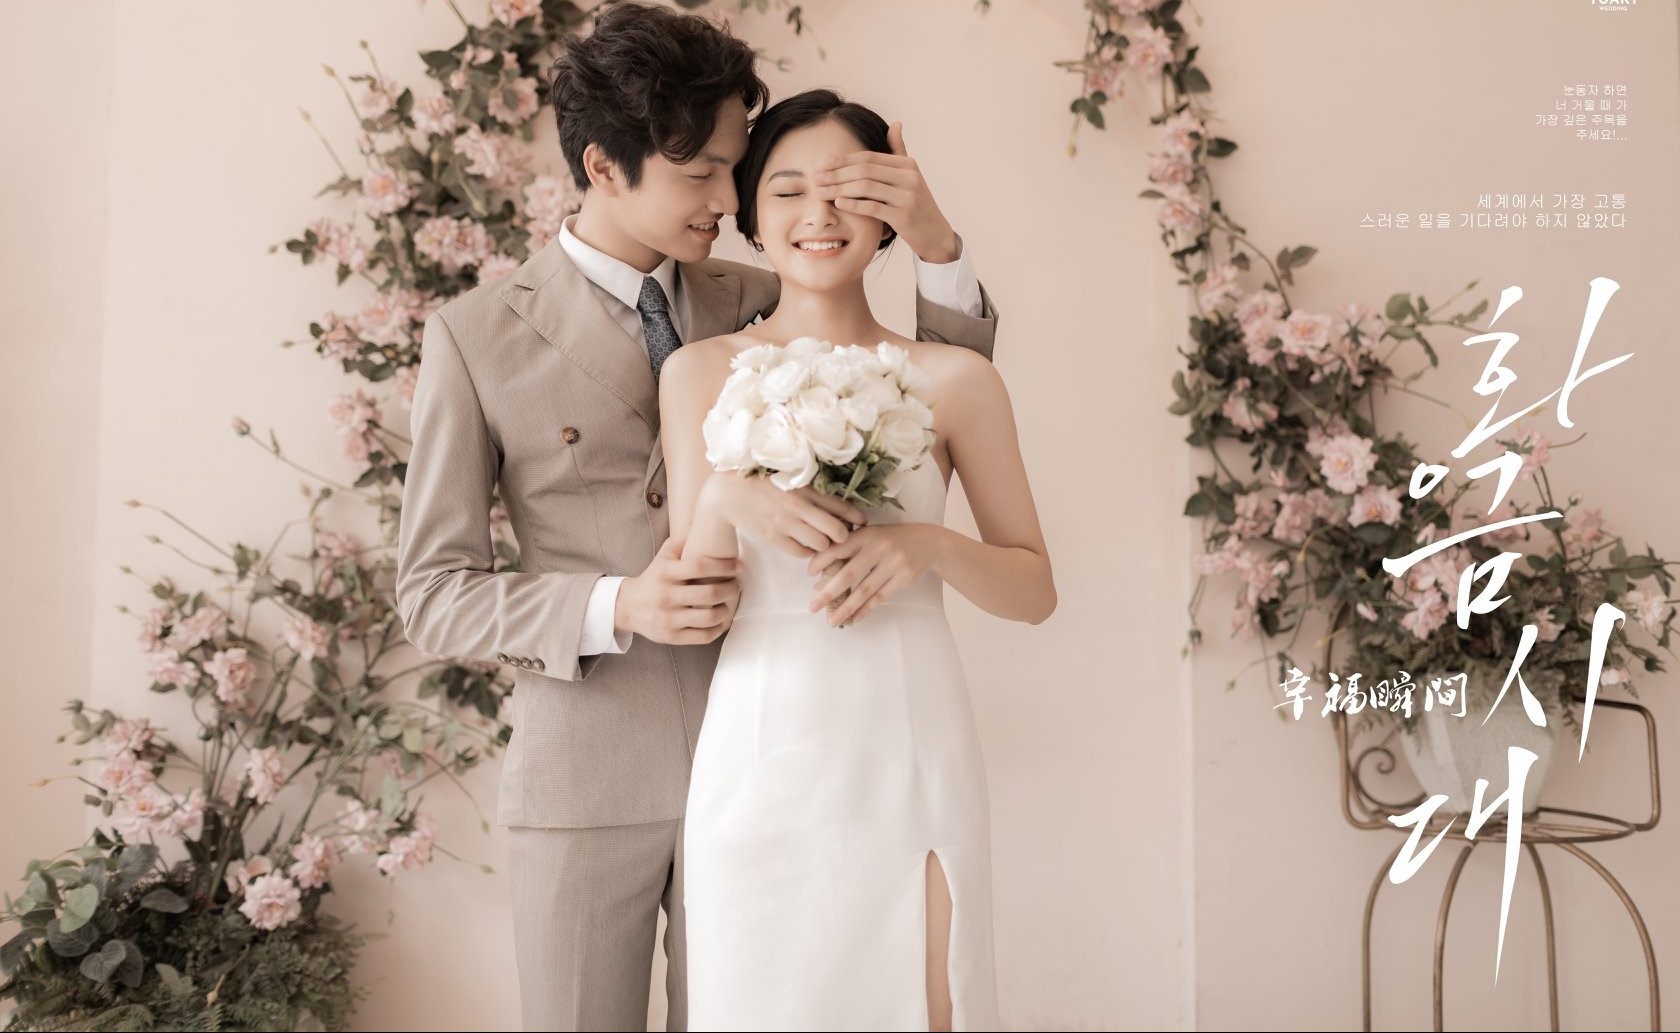 Chuẩn bị chụp hình cưới Hàn Quốc: Ready to shoot your dream wedding photos in Korea? Here are some helpful tips and things to prepare beforehand for a smooth and enjoyable experience. Discover the must-knows and prepare to shine in front of the camera.